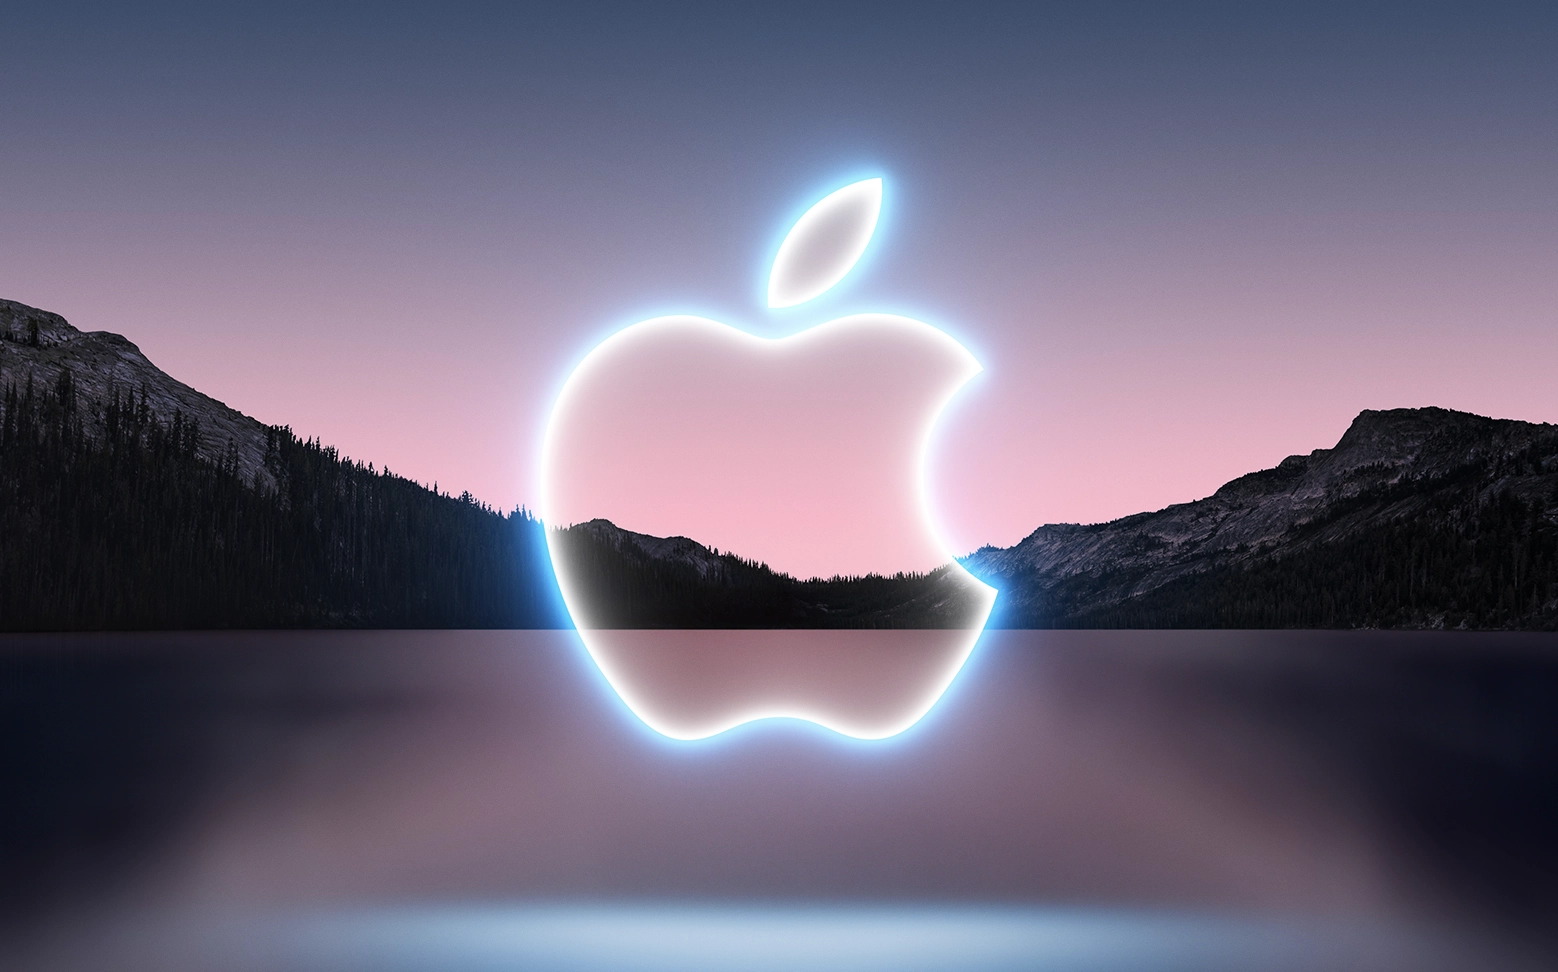 Apple’s ’California Streaming’ event 2021